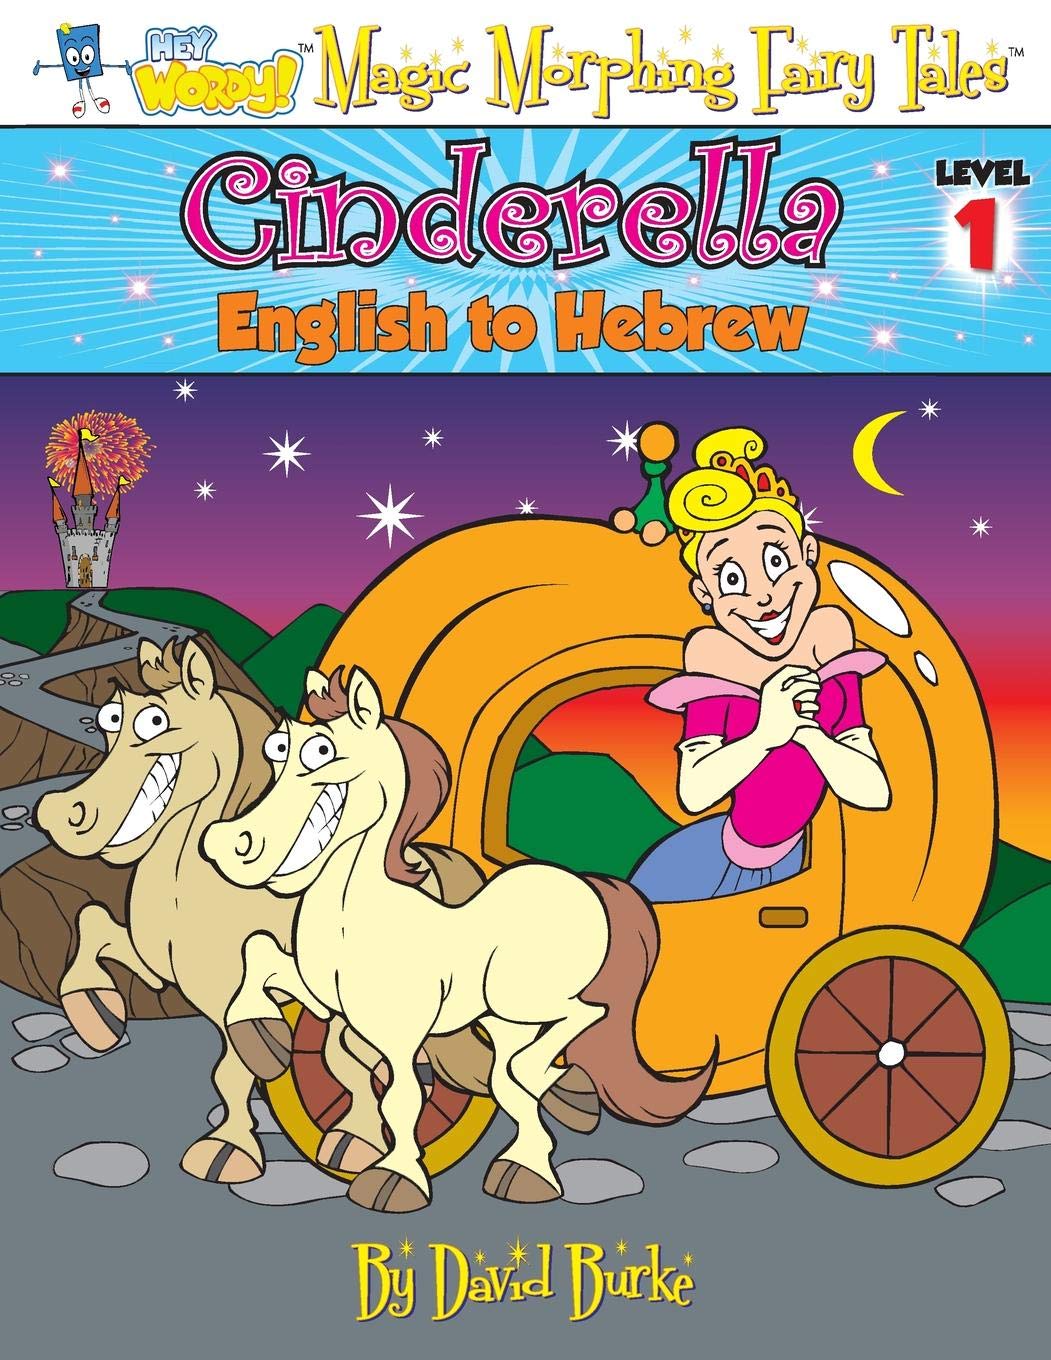 Cinderella: English to Hebrew, Level 1 (Hey Wordy Magic Morphing Fairy Tales)